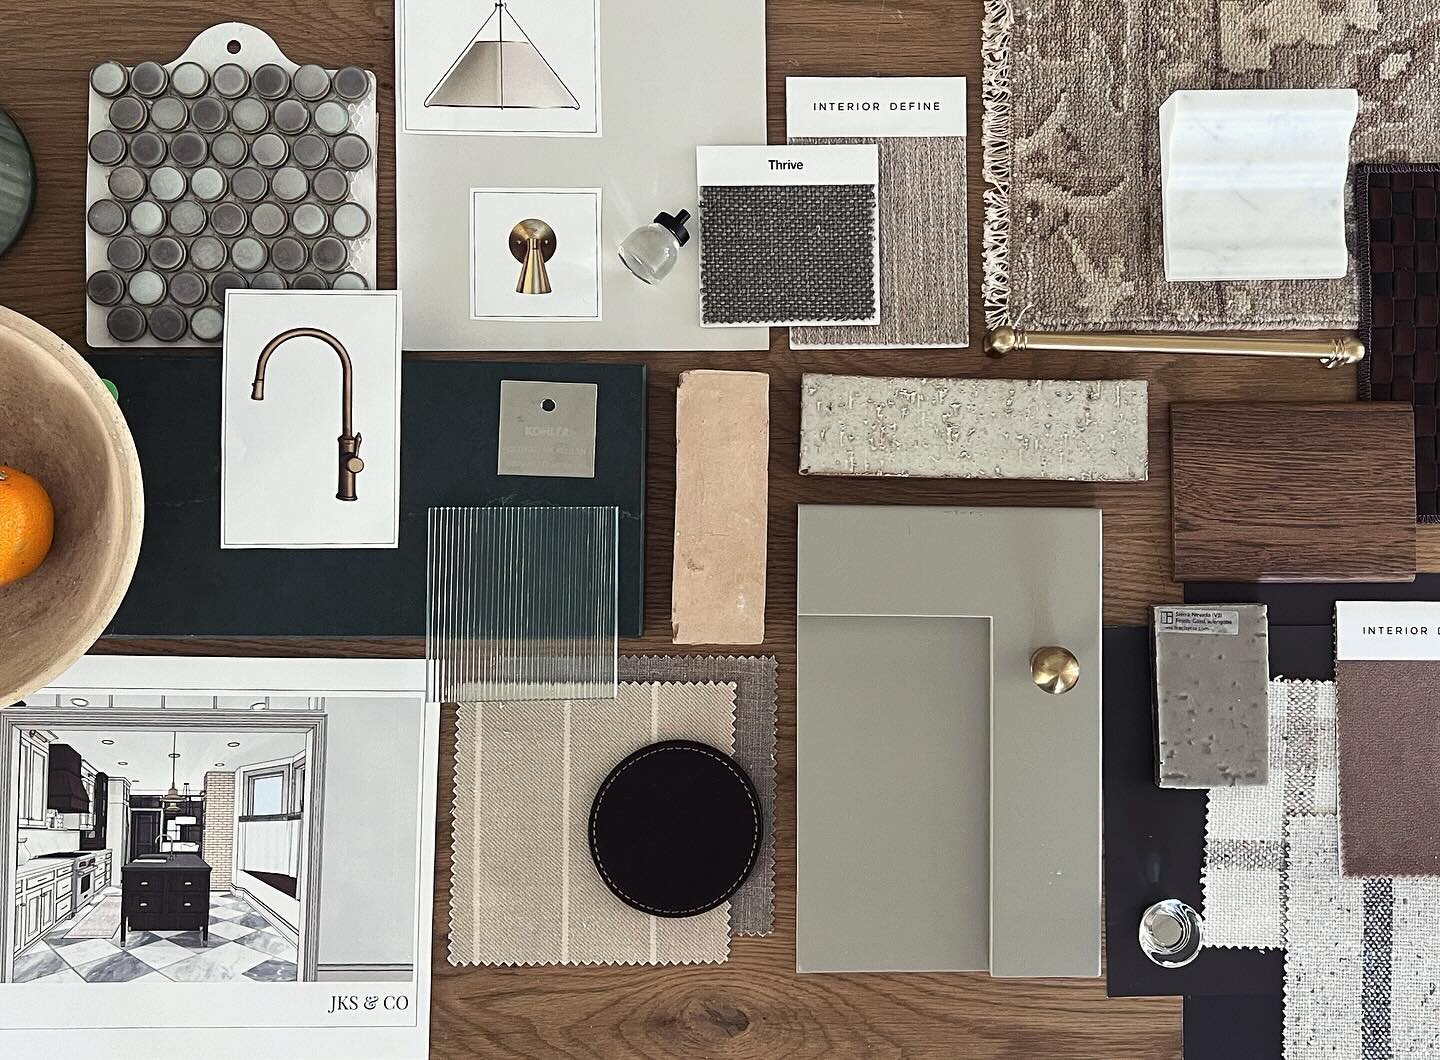 Design presentation in the studio today. Soapstone countertops, bold checkerboard flooring, fluted glass, furniture style custom island and antique pieces to create a timeless space. ✨